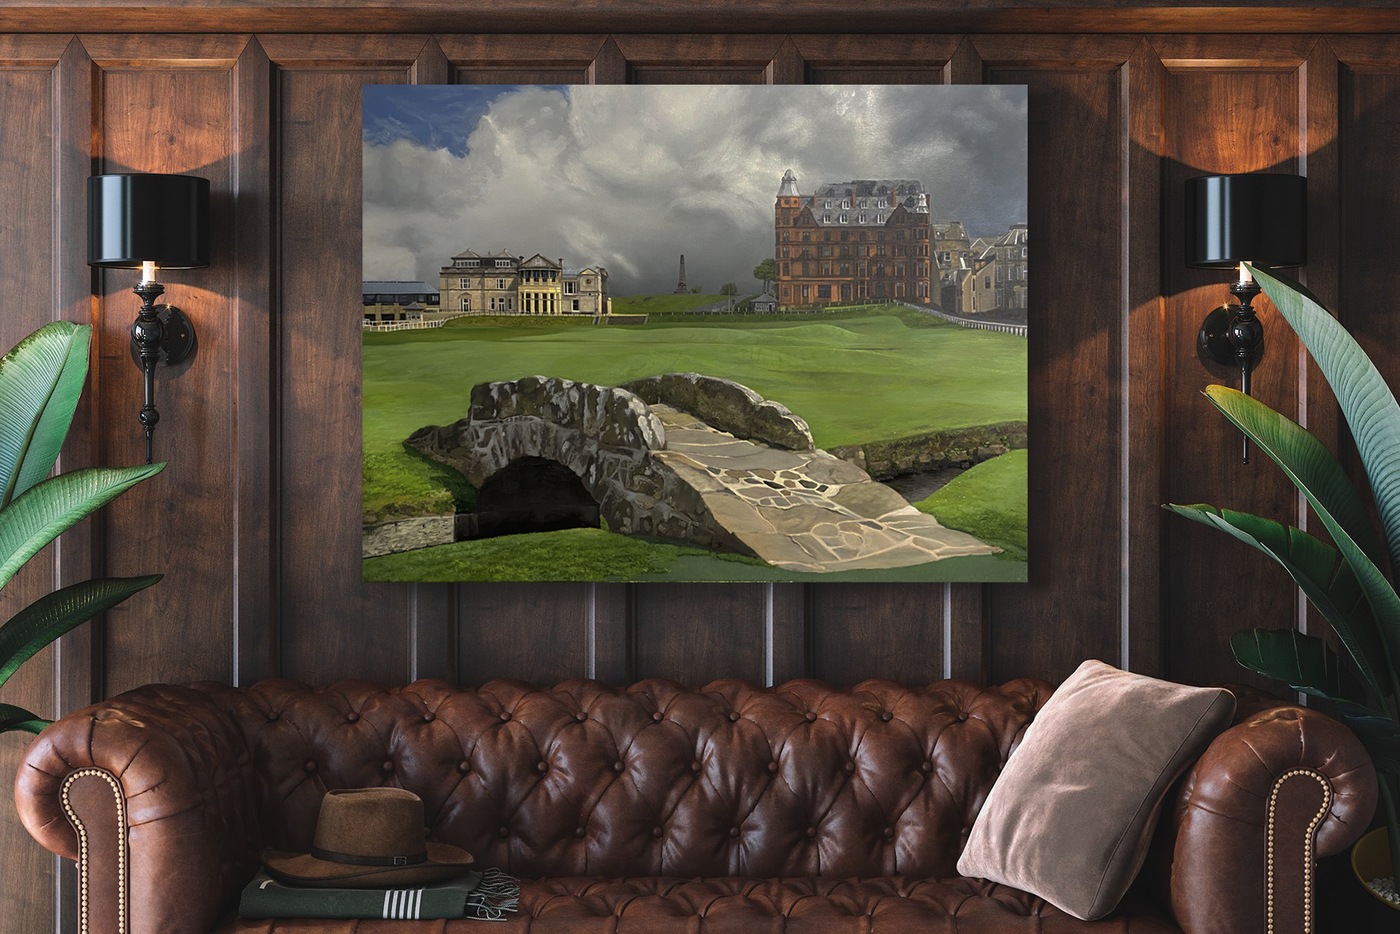 "No. 18 at the Old Course at St Andrews Links", 48 x 36 inches painting